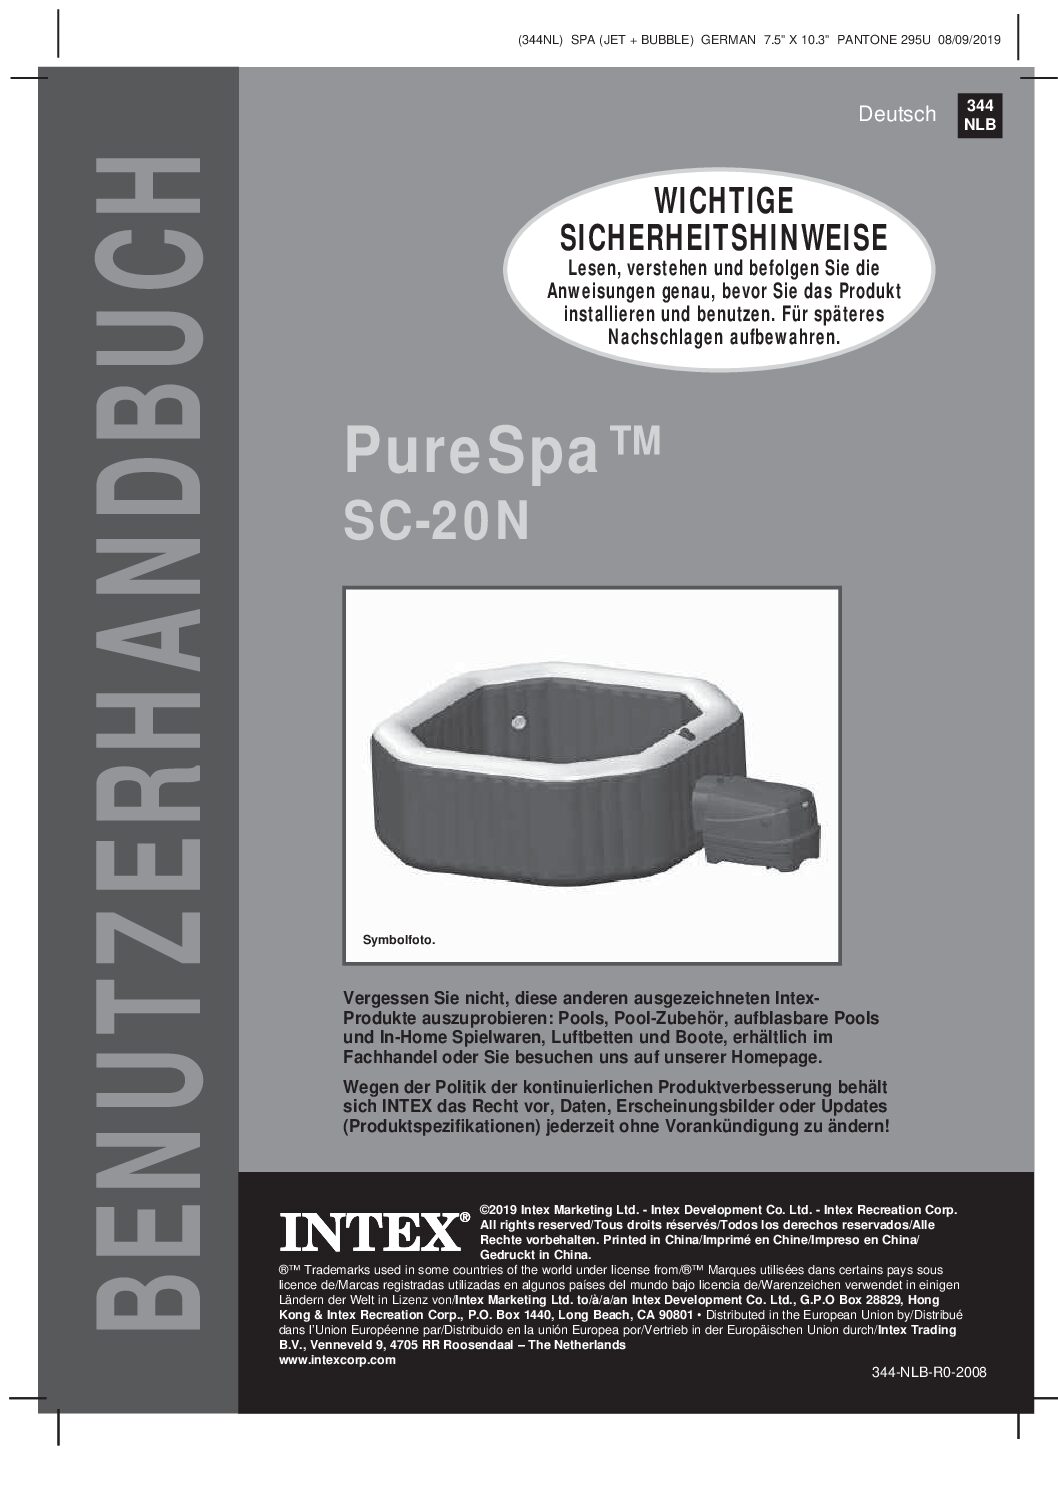 Intex Purespa Jet And Bubble Deluxe SC-20N Bedienungsanleitung